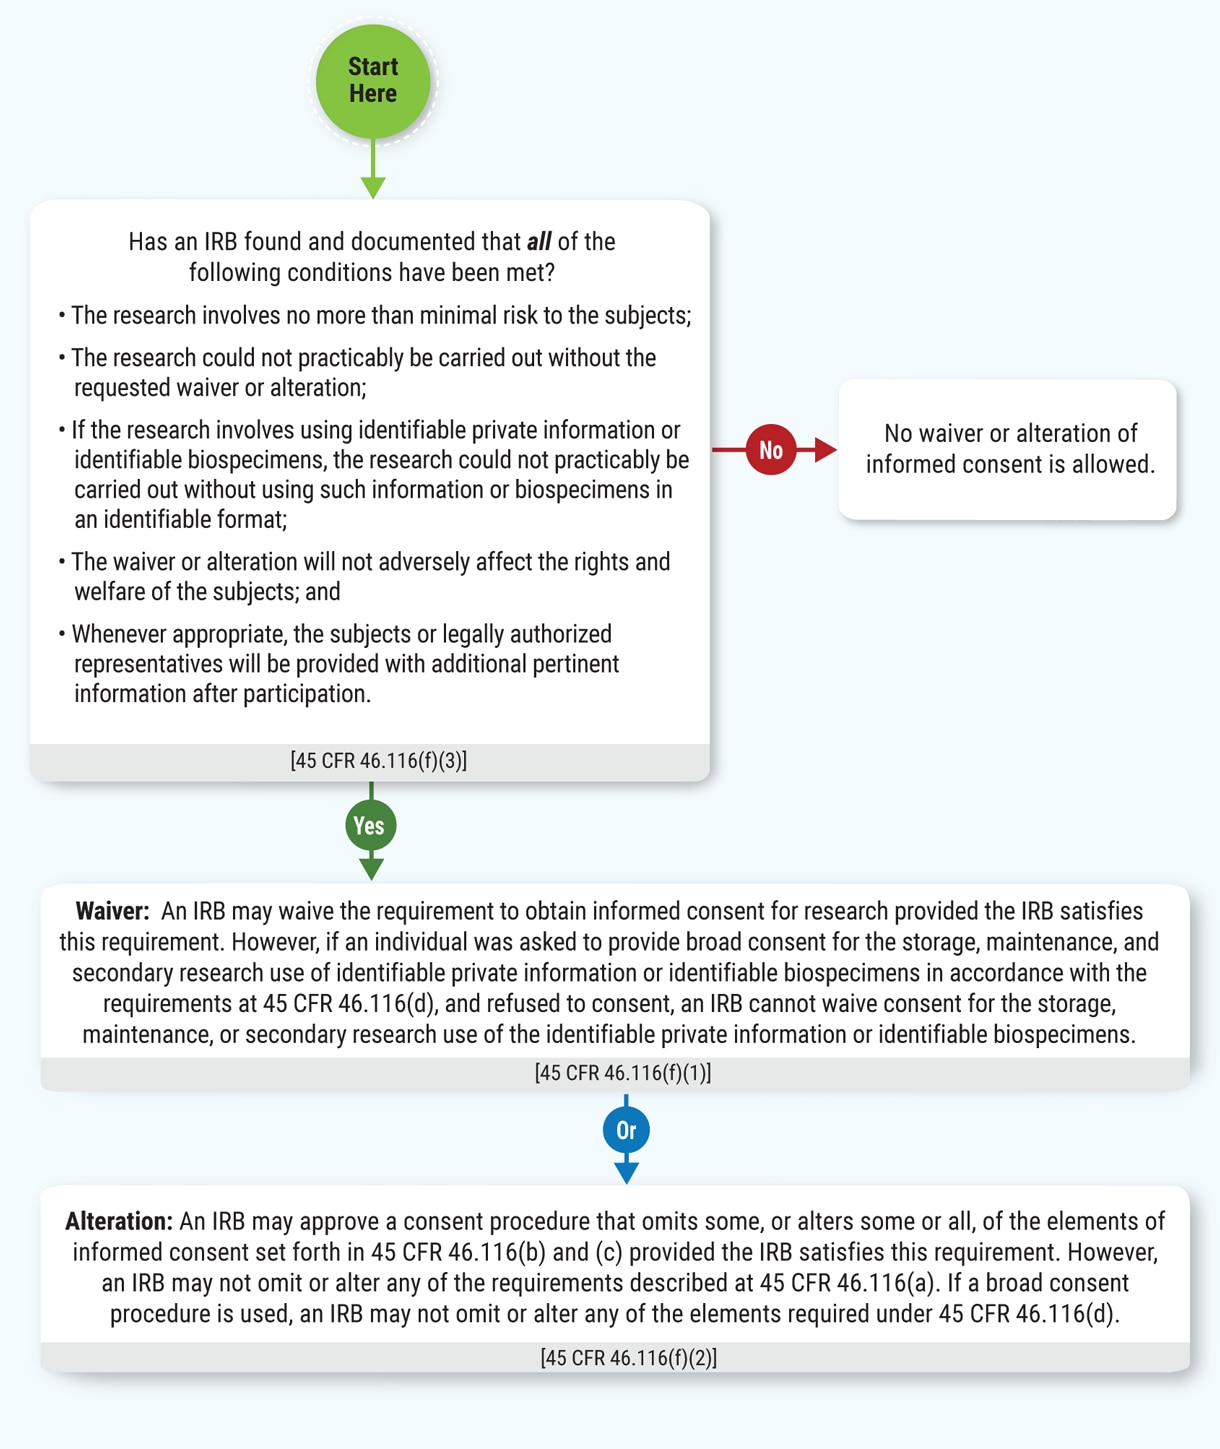 Chart 13: When Can Informed Consent as Waived or Altered Under 45 CFR 46.116(f)?